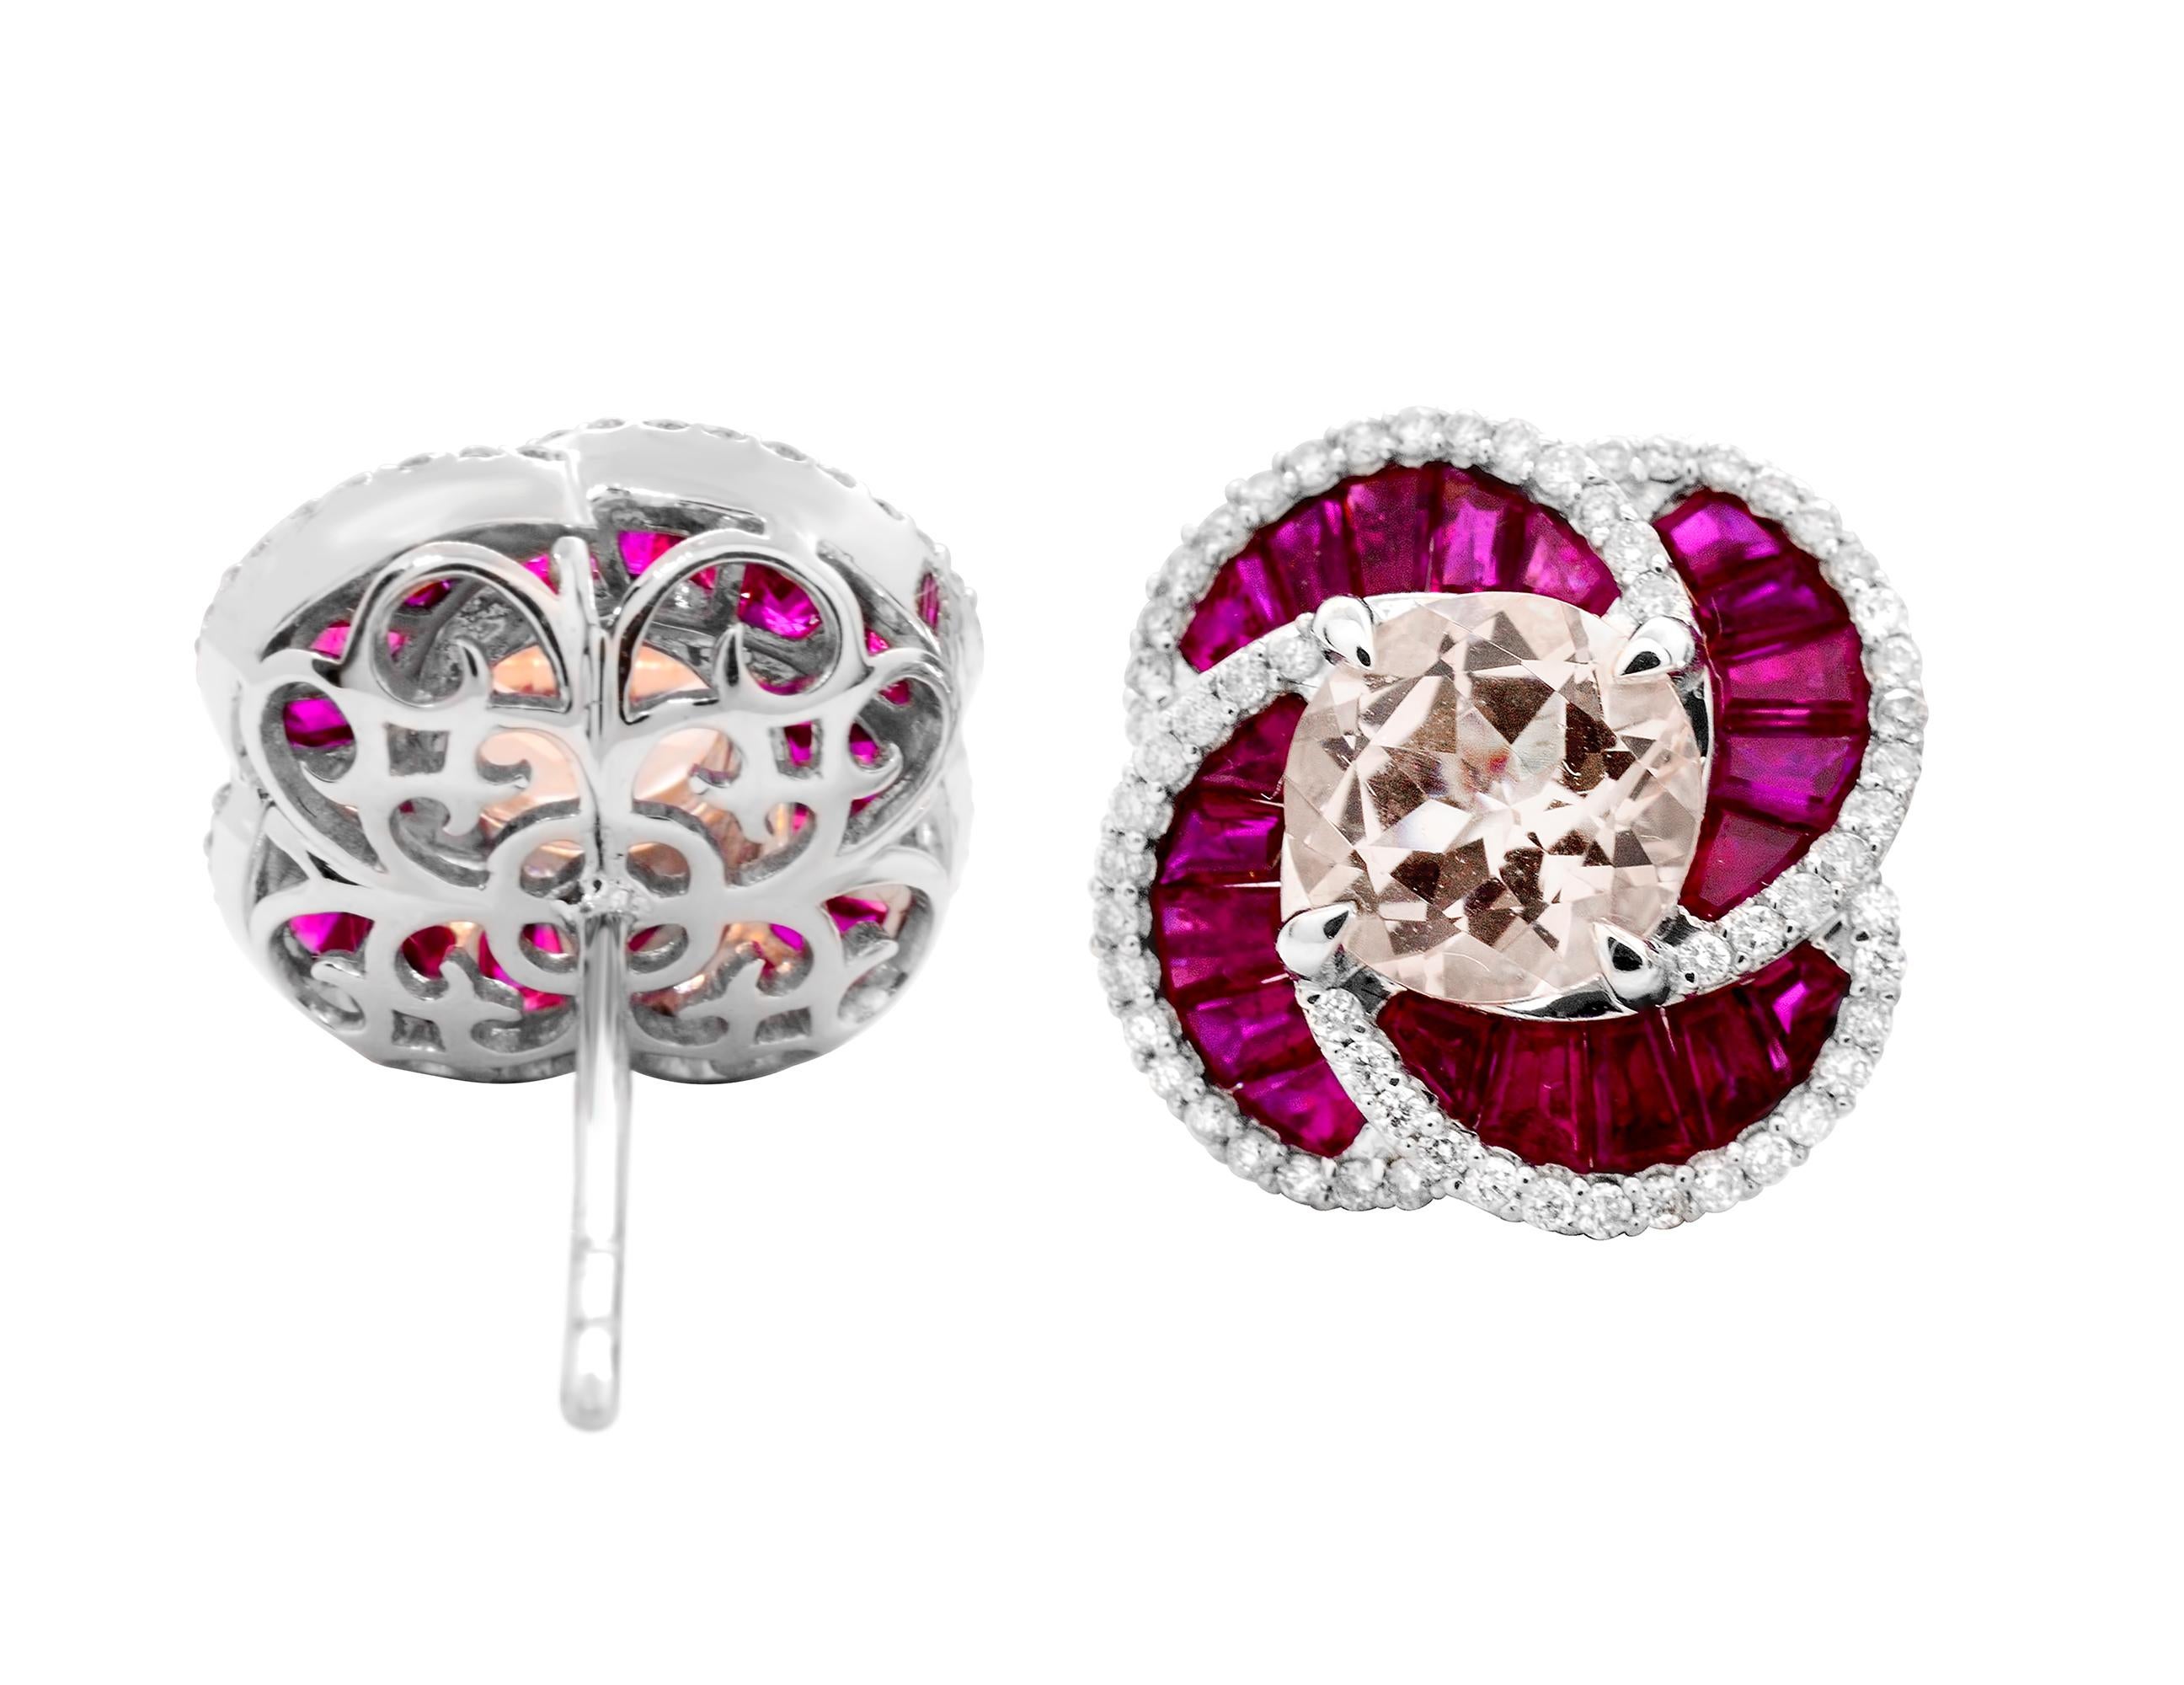 Contemporary flower motif stud earrings set in 14 Karat white gold.  
These center round morganites have a light pink color with the slightest splash of orange and are a substantial 7mm each. 
They are surrounded by the richest red ruby baguettes of